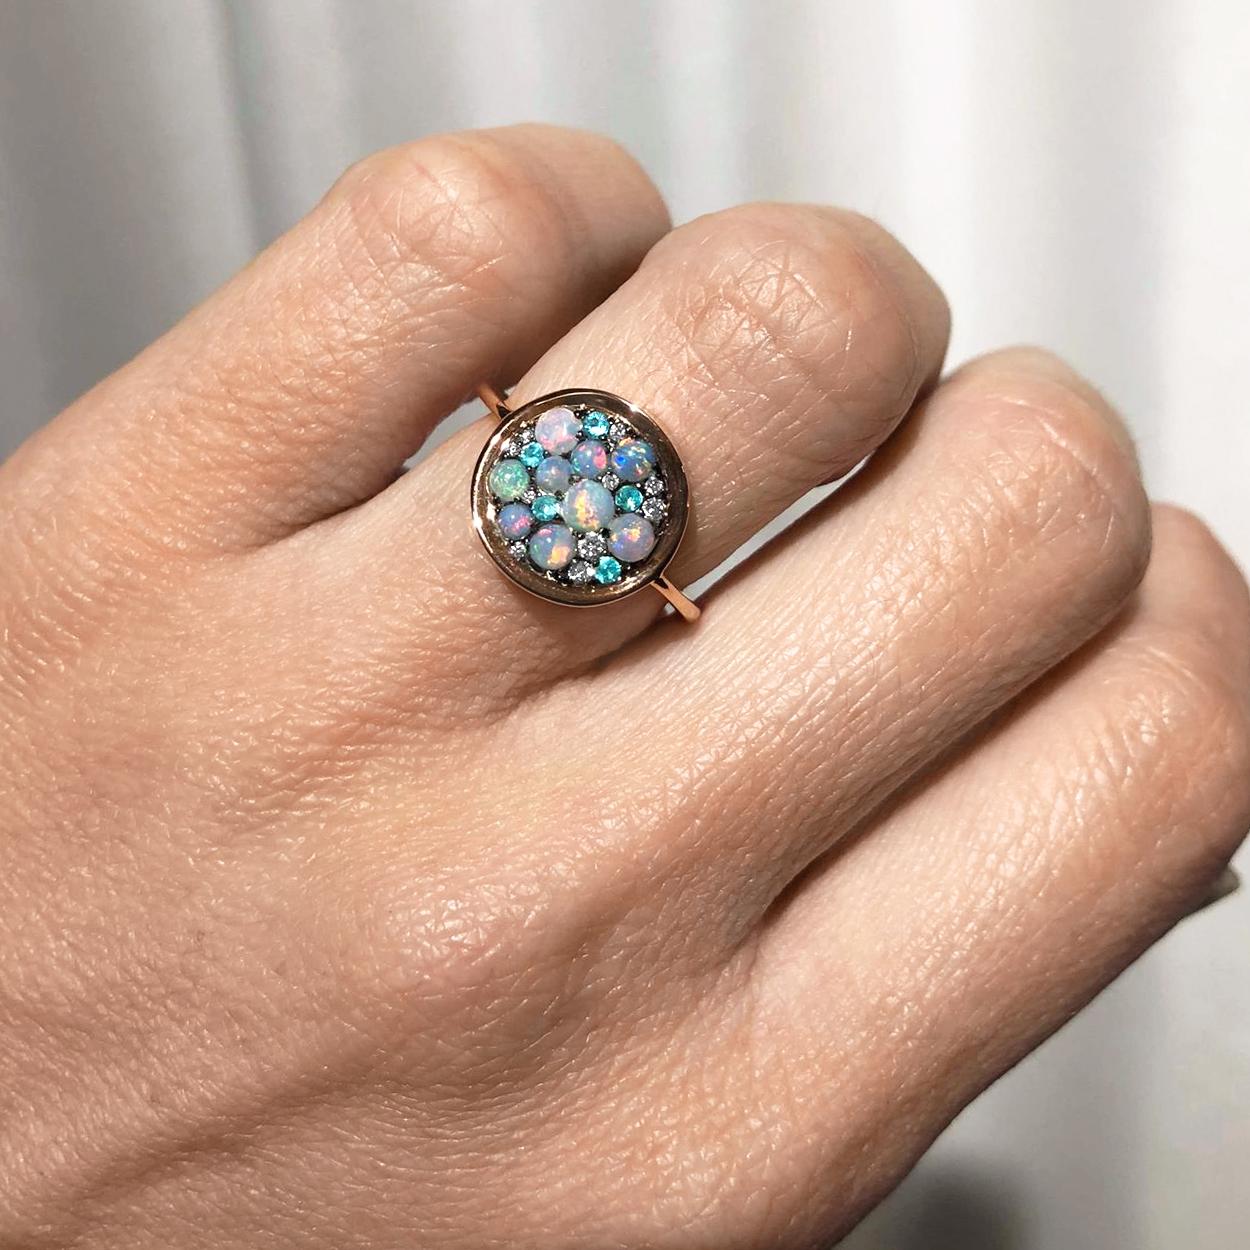 One of a Kind Starstruck Ring handmade in Belgium by jewelry artist Joke Quick in high-polished 18k rose gold featuring a curved oxidized sterling silver disc set with an assortment of spectacular Australian opal cabochons, Paraiba tourmaline